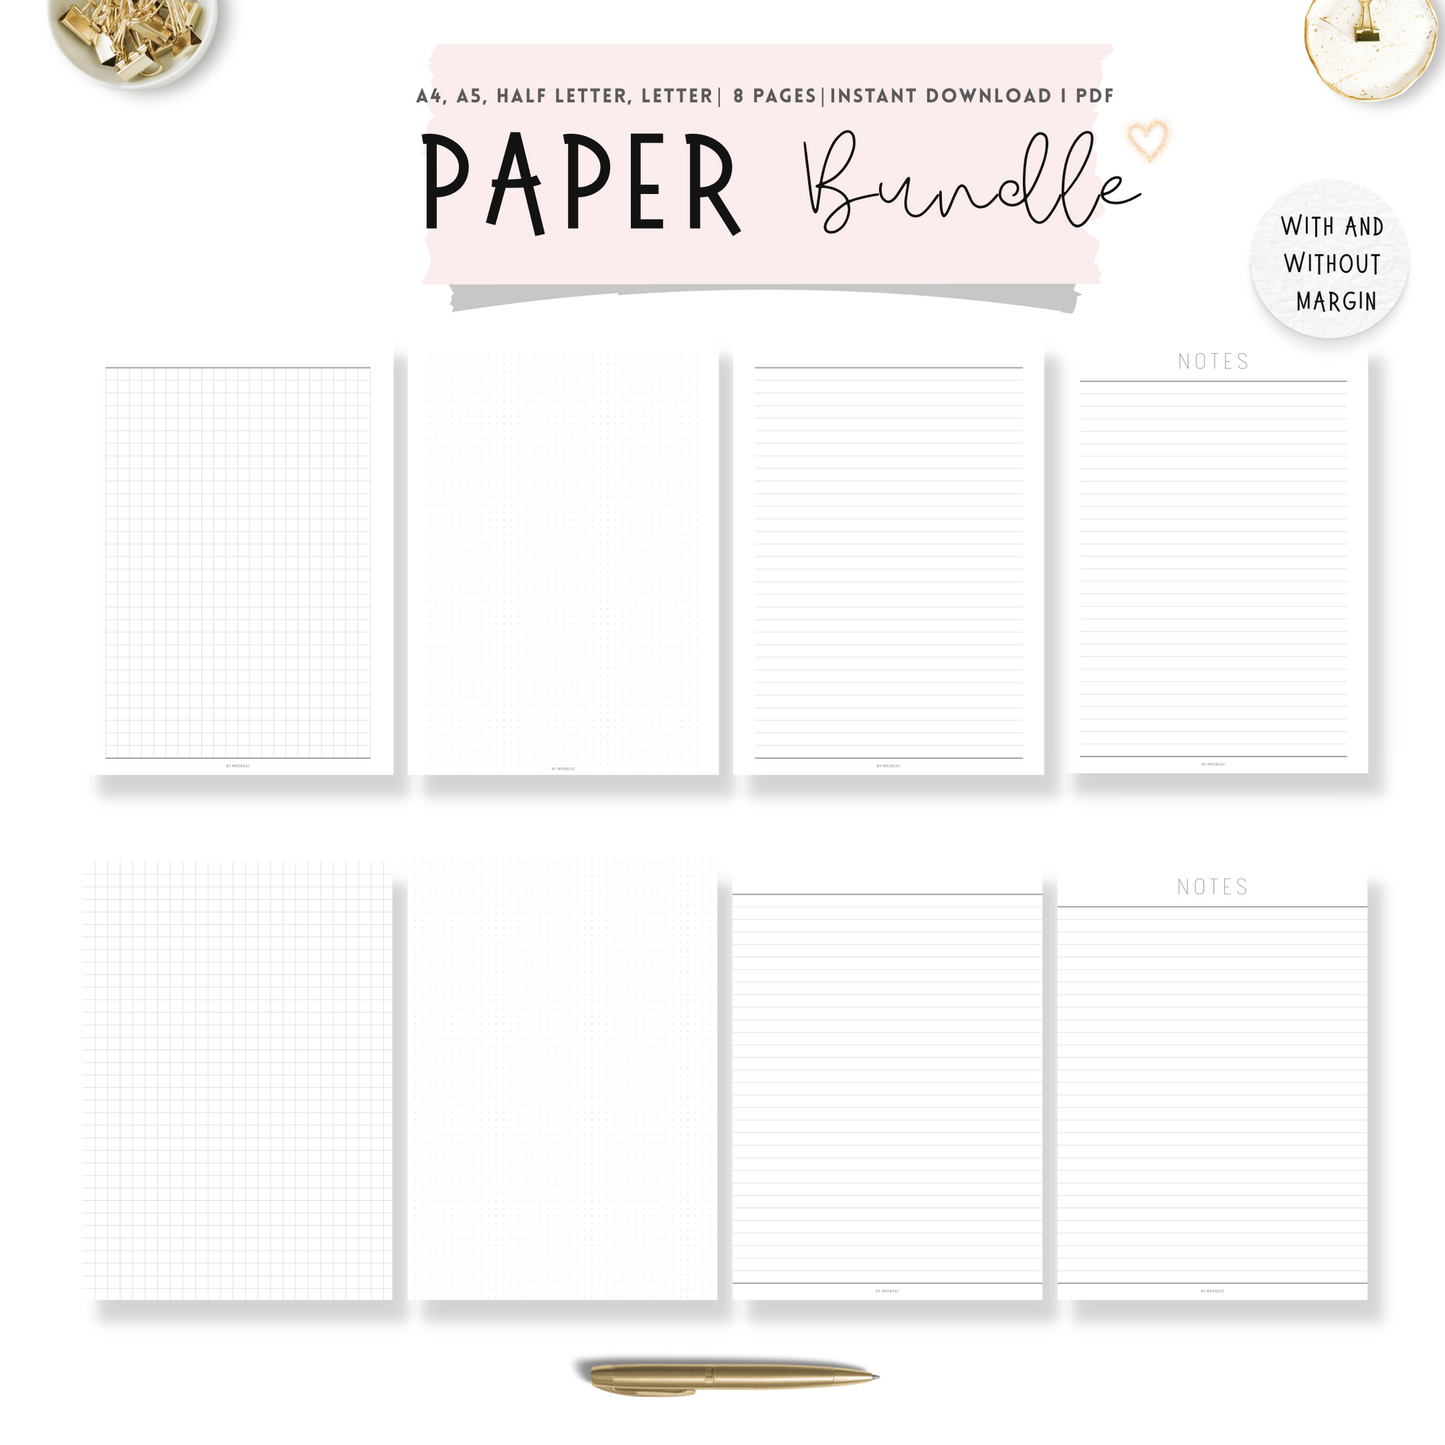 8 paper pages consist of Grid Paper, Dotted Paper, Lined Paper and Notes paper with and without margin